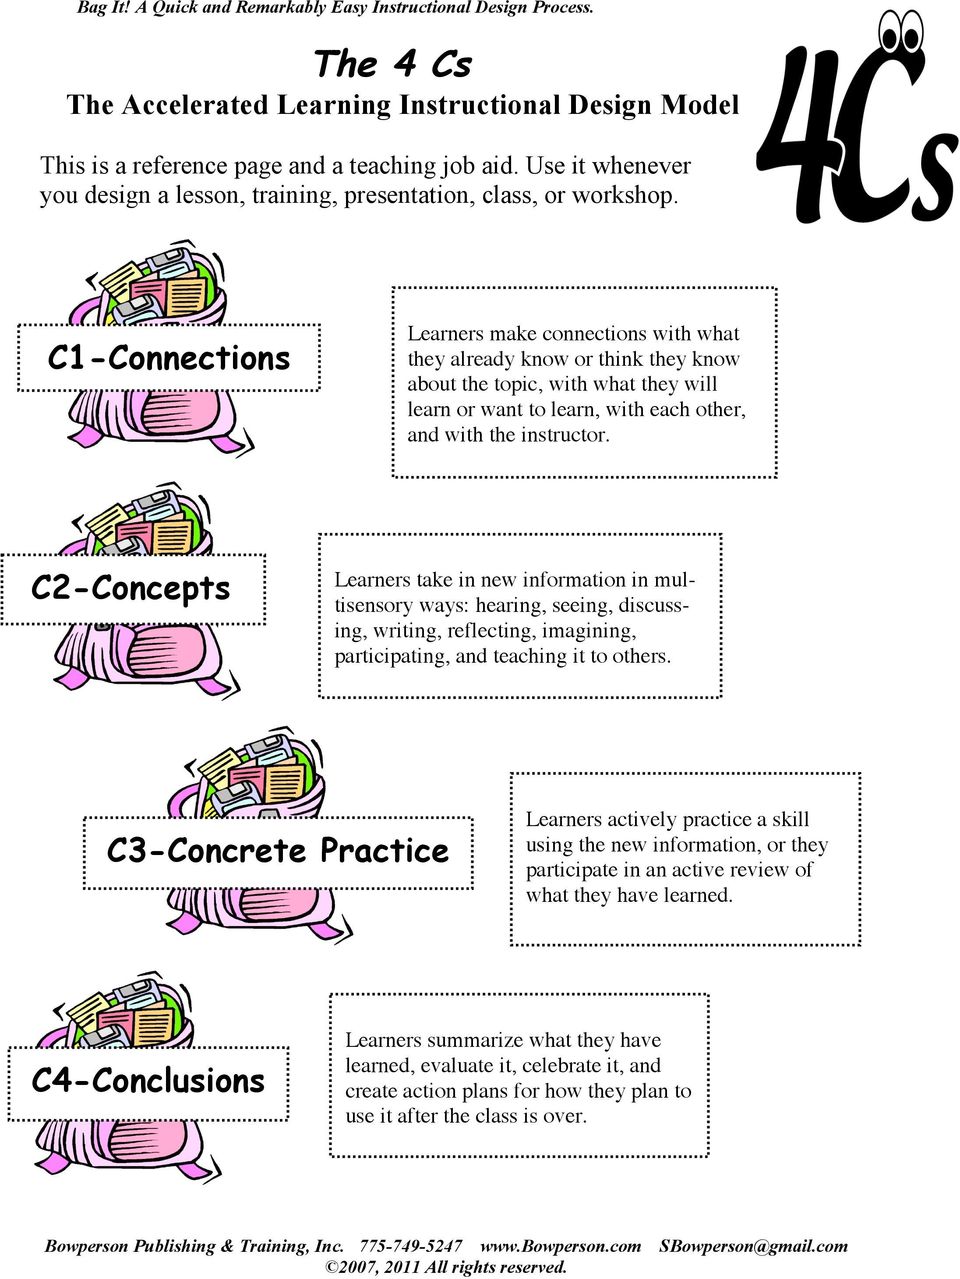 C1-Connections C2-Concepts Learners make connections with what they already know or think they know about the topic, with what they will learn or want to learn, with each other, and with the